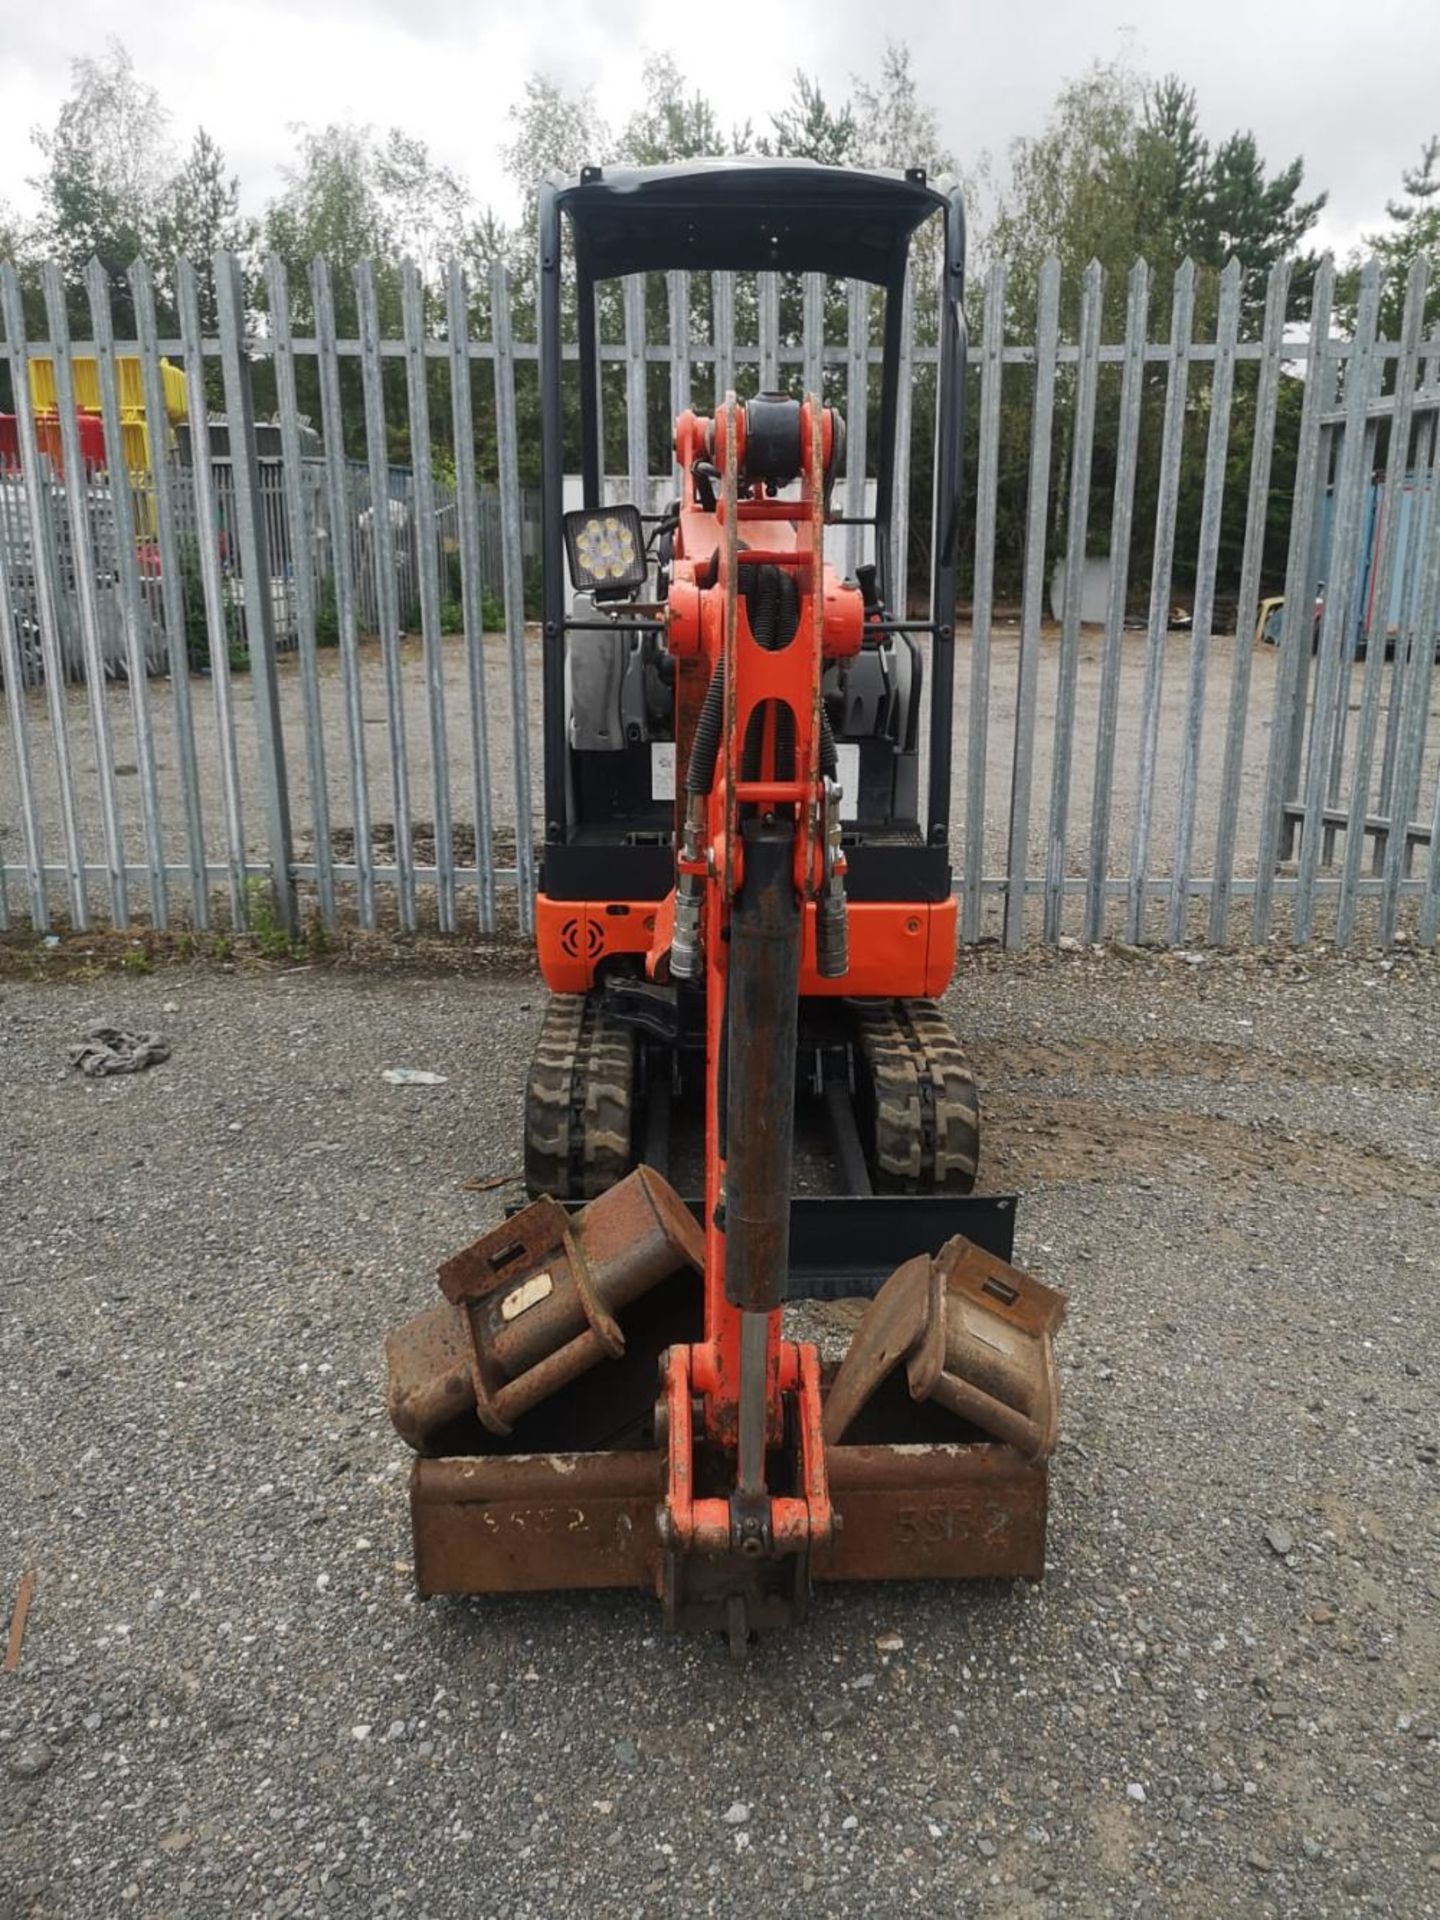 KUBOTA KX016.4 MINIDIGGER C.W 3 BUCKETS, 2015 2178HRS RDD 2 SPEED TRACKING PIPED FOR HAMMER, - Image 3 of 8